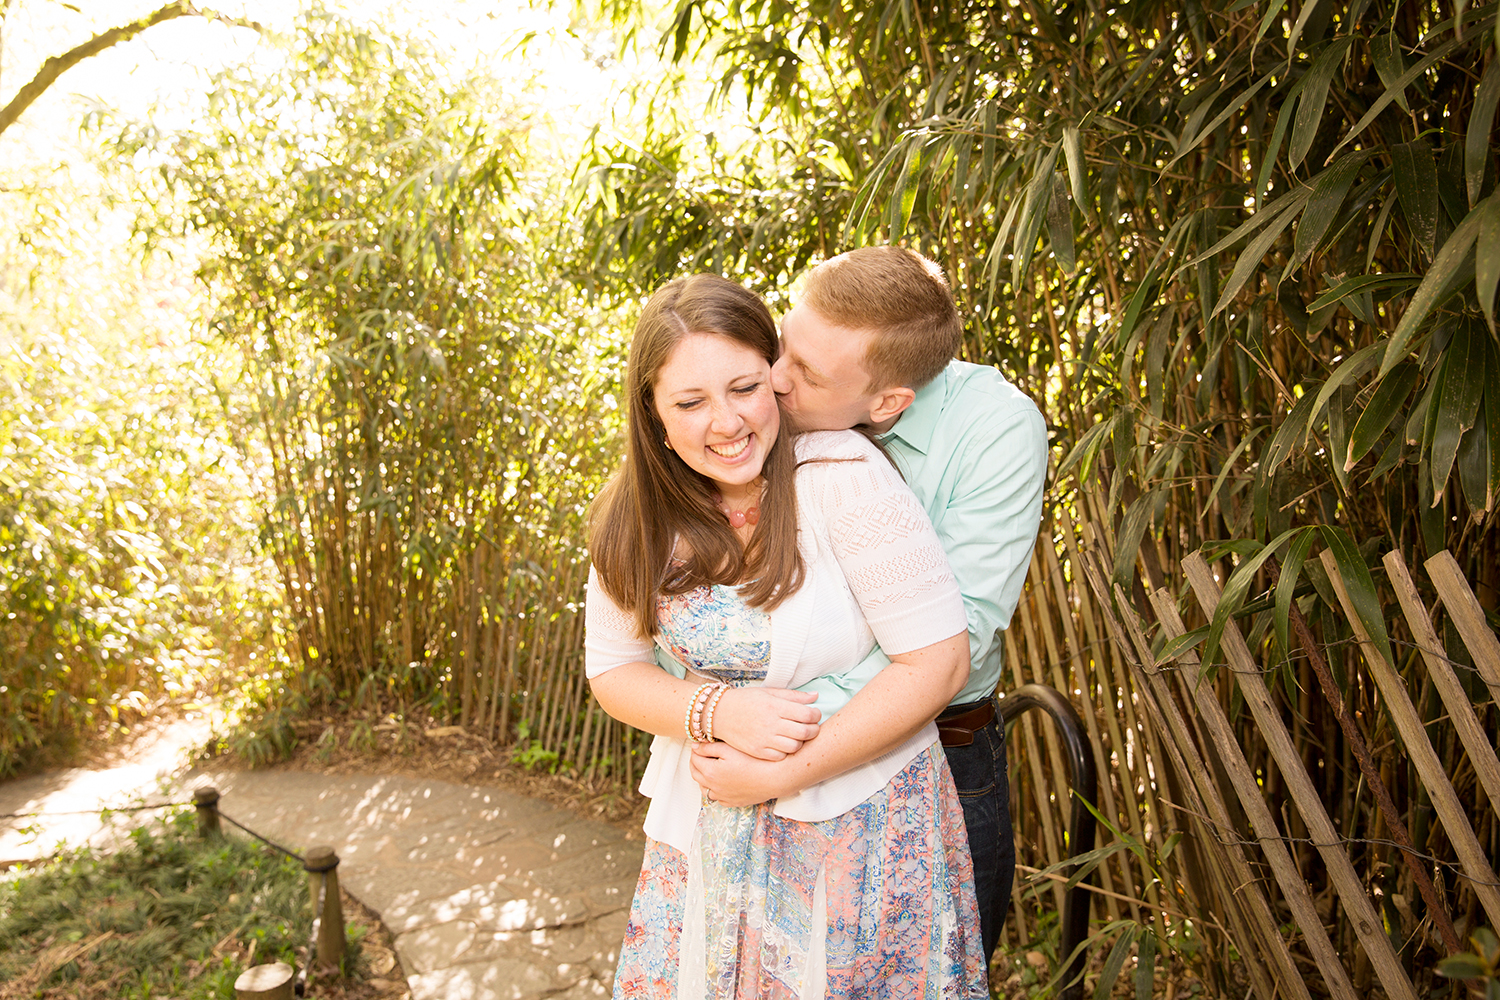 Christina  Mikes Spring Engagement Shoot at Maymont - Image Property of www.j-dphoto.com